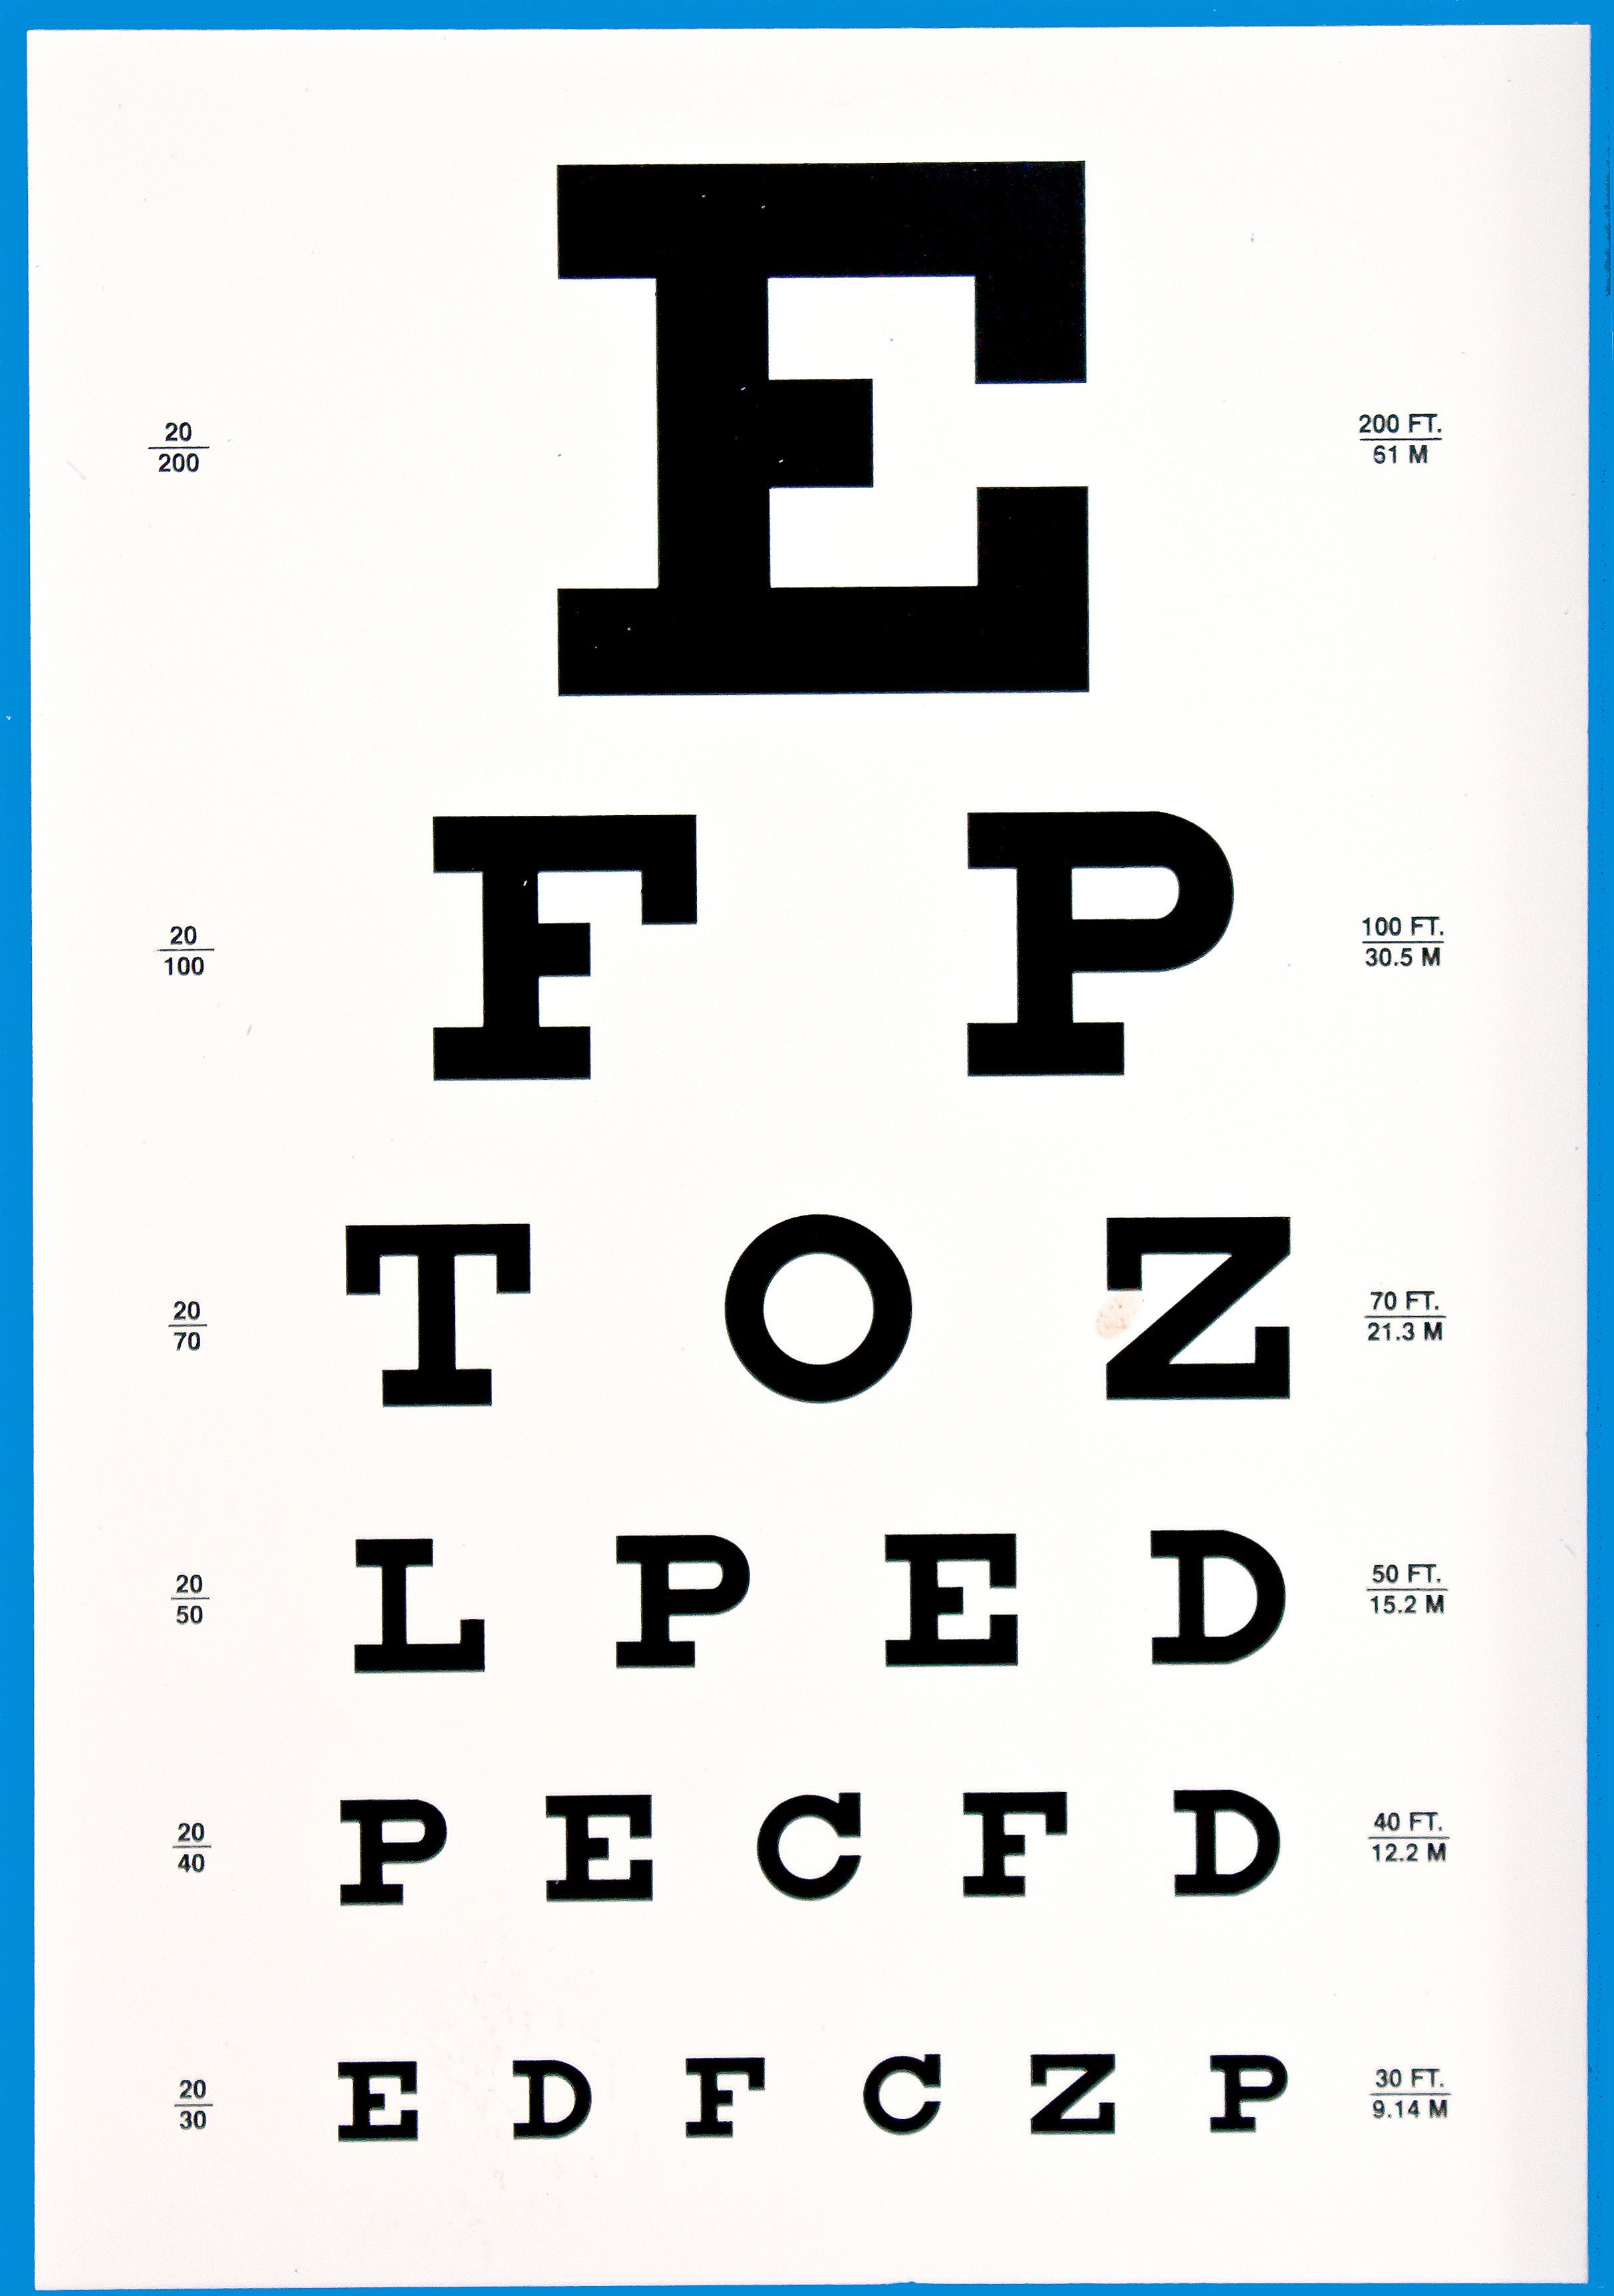 printable-snellen-eye-charts-disabled-world-is-there-lasik-after-age-50-woolfson-eye-institute